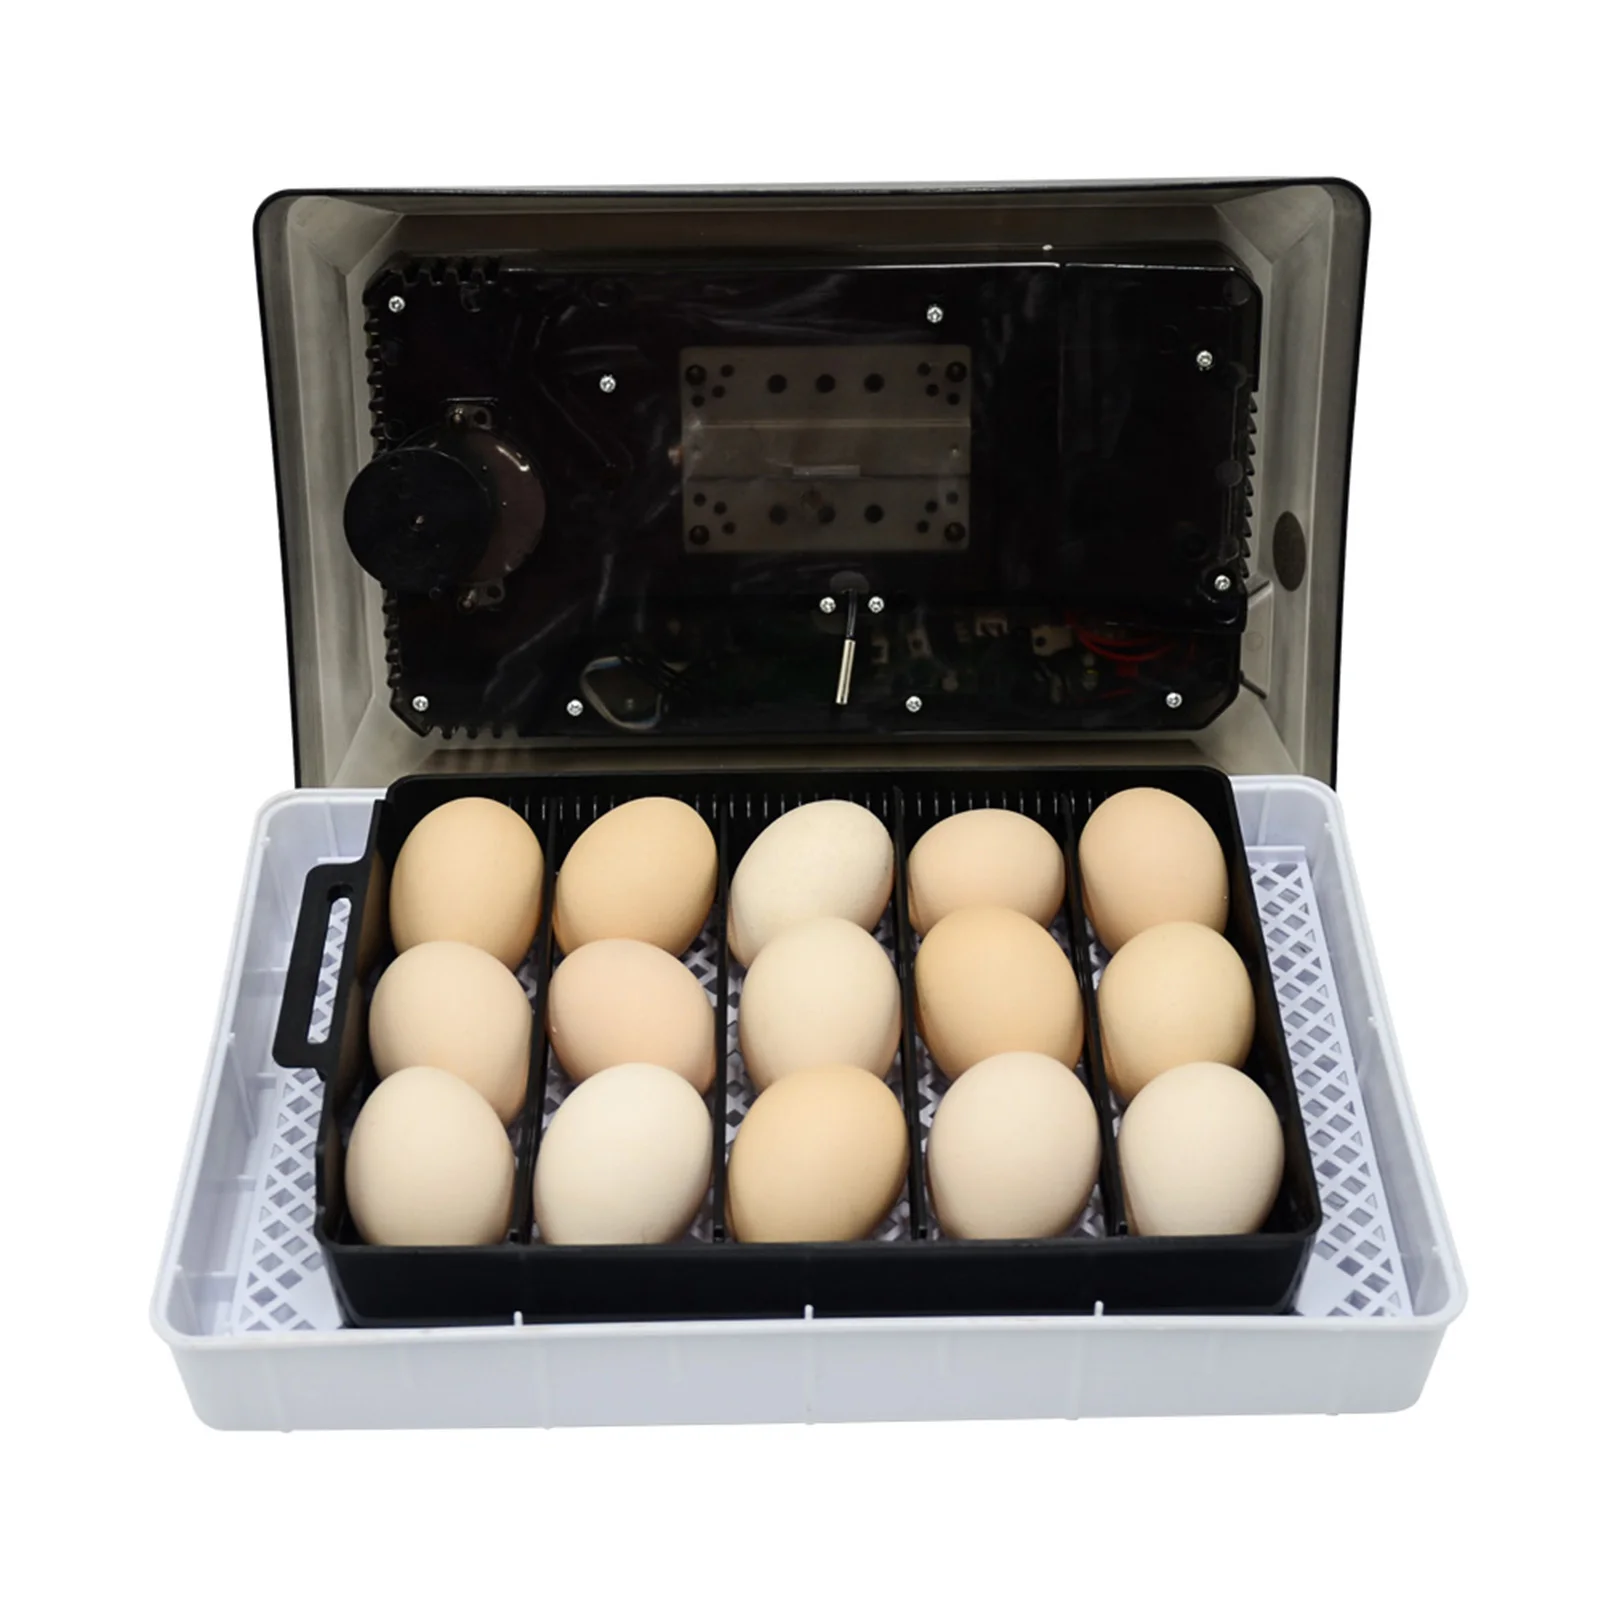 

Egg Incubators Digital Fully Automatic Hatcher for 15 Eggs Chickens Duck Turkey Egg Poultry Eggs Hatcher LED Screen FEA8